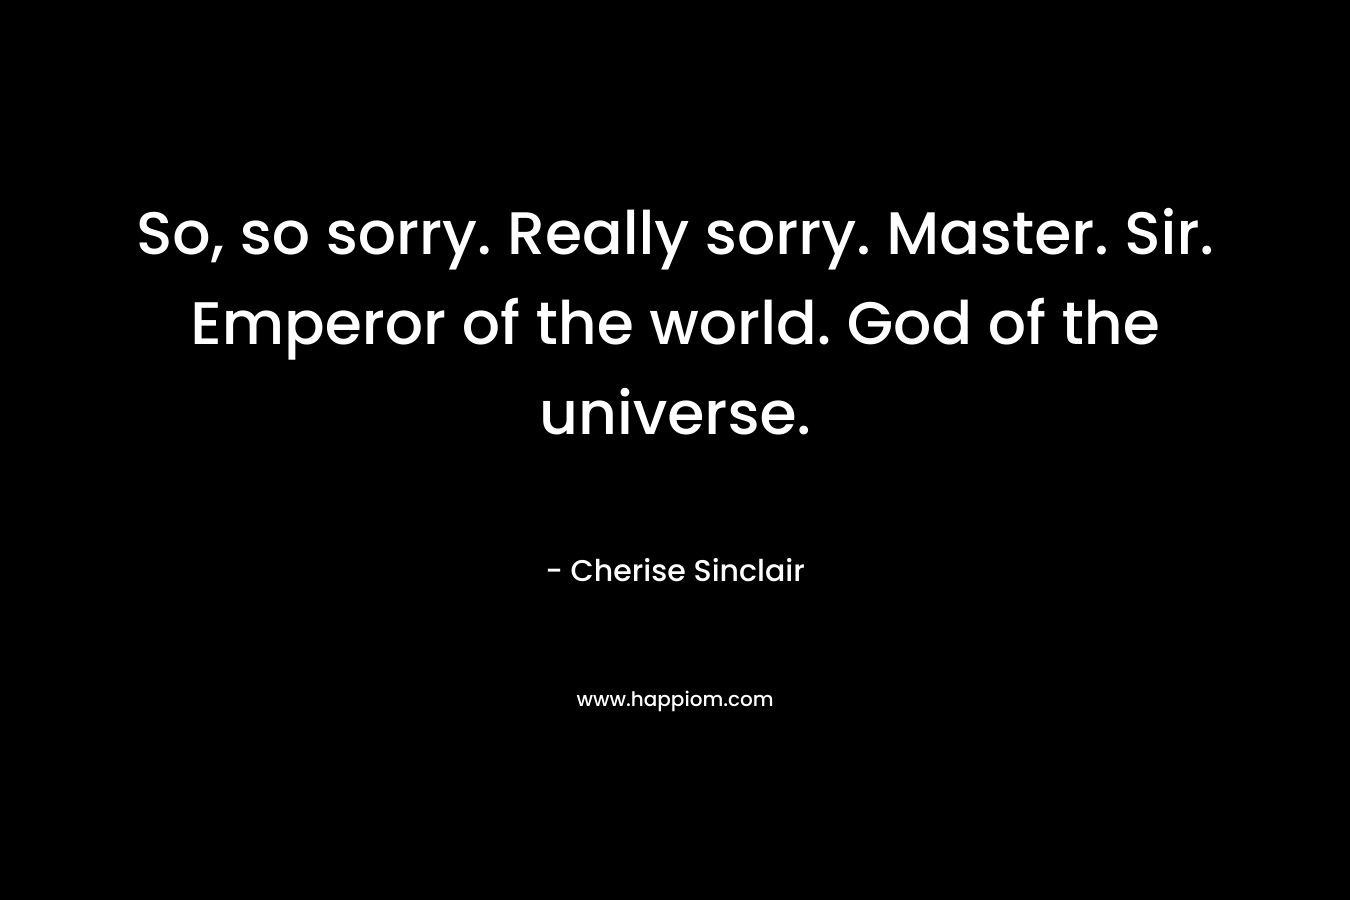 So, so sorry. Really sorry. Master. Sir. Emperor of the world. God of the universe. – Cherise Sinclair